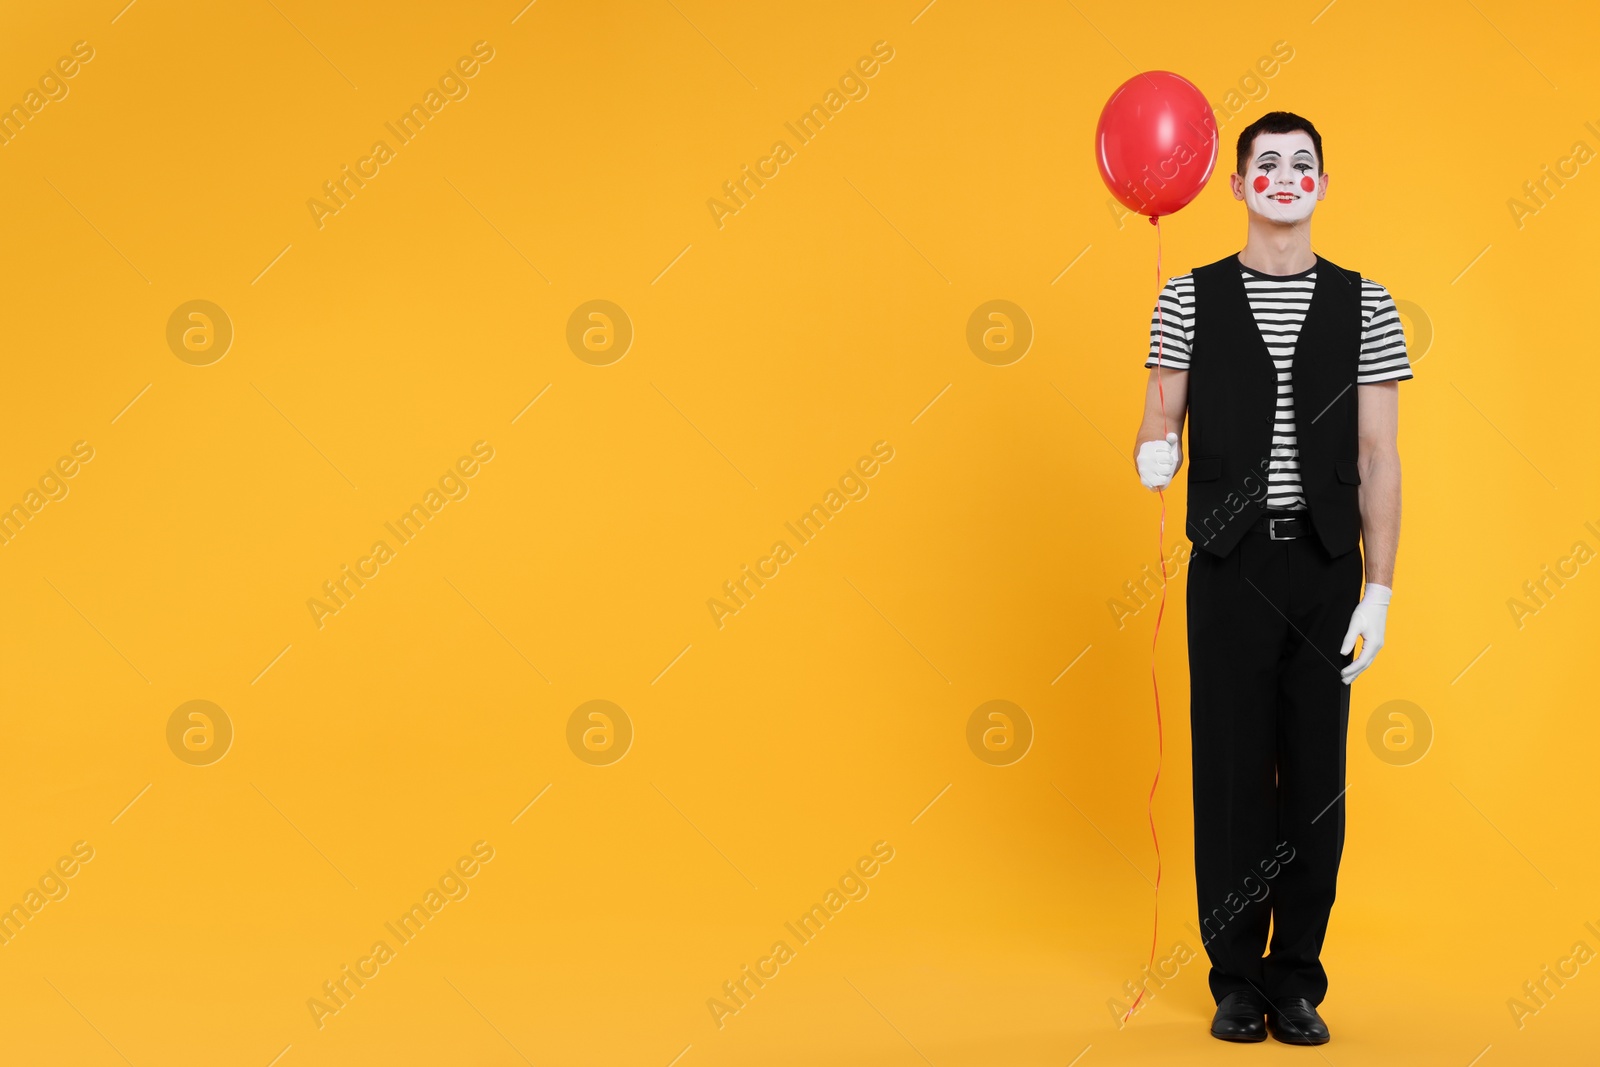 Photo of Funny mime artist with balloon on orange background. Space for text